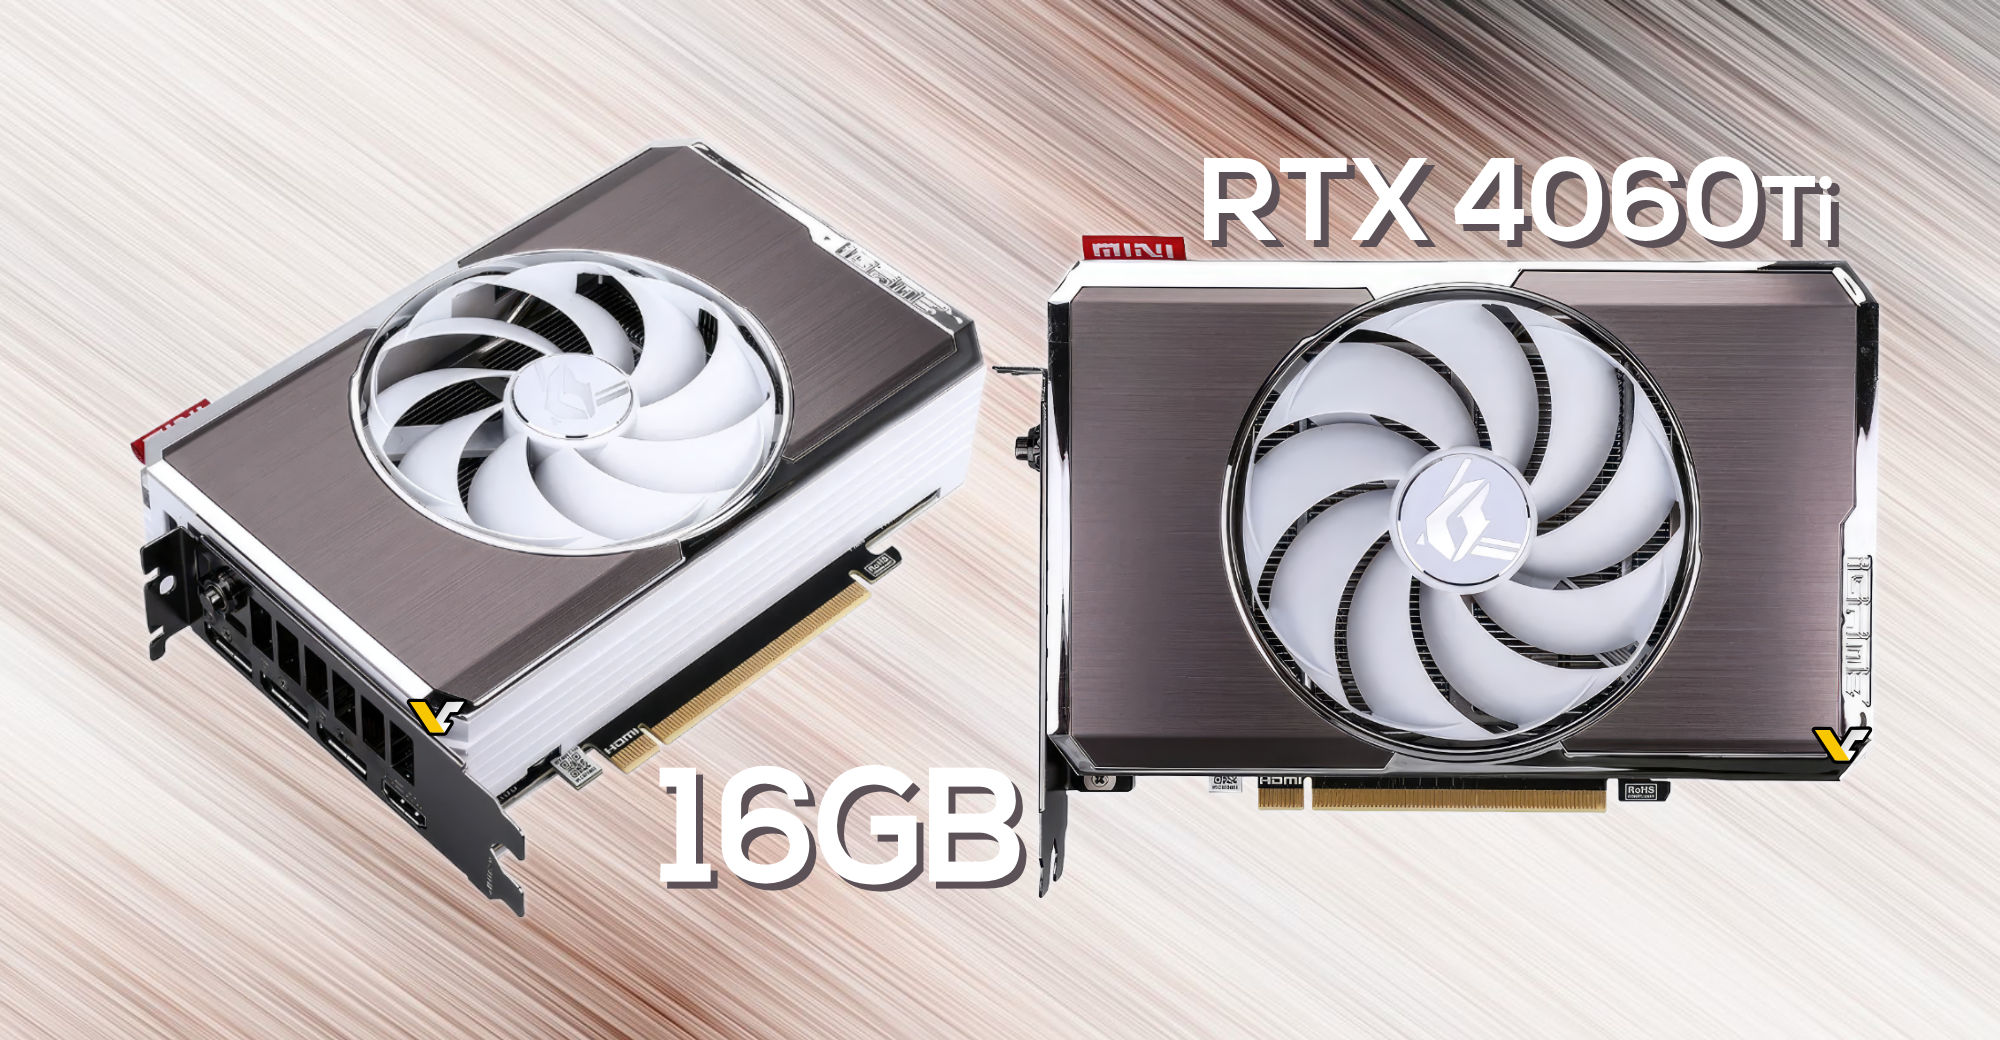 Colorful Launches an Adorable RTX 4060 Ti 16GB